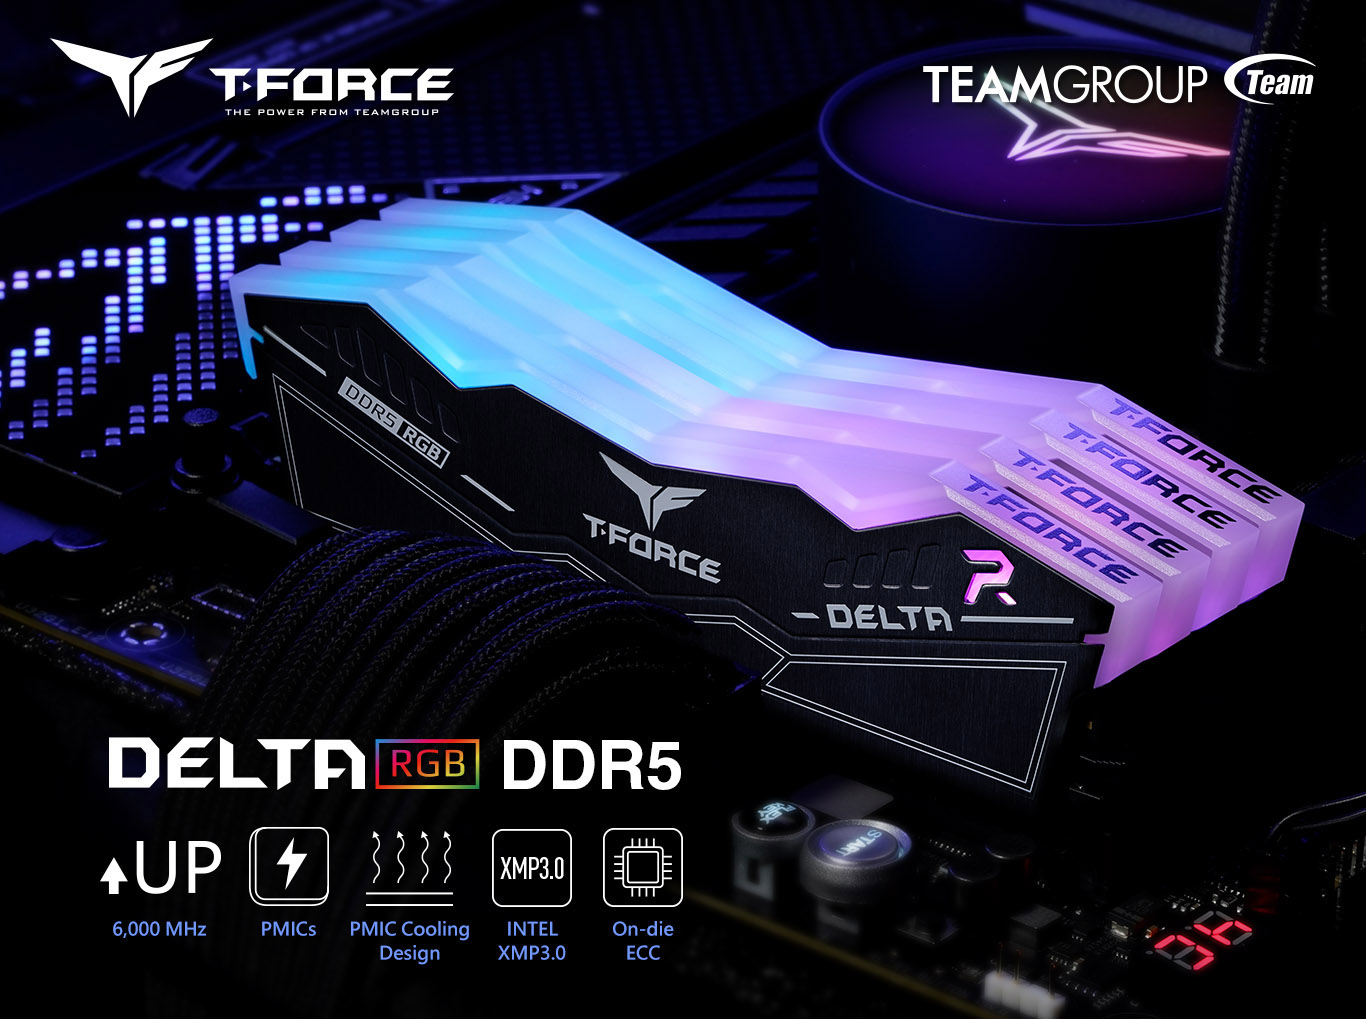 T-Force Delta RGB: Teamgroup brings DDR5 kit with 7,200 MHz